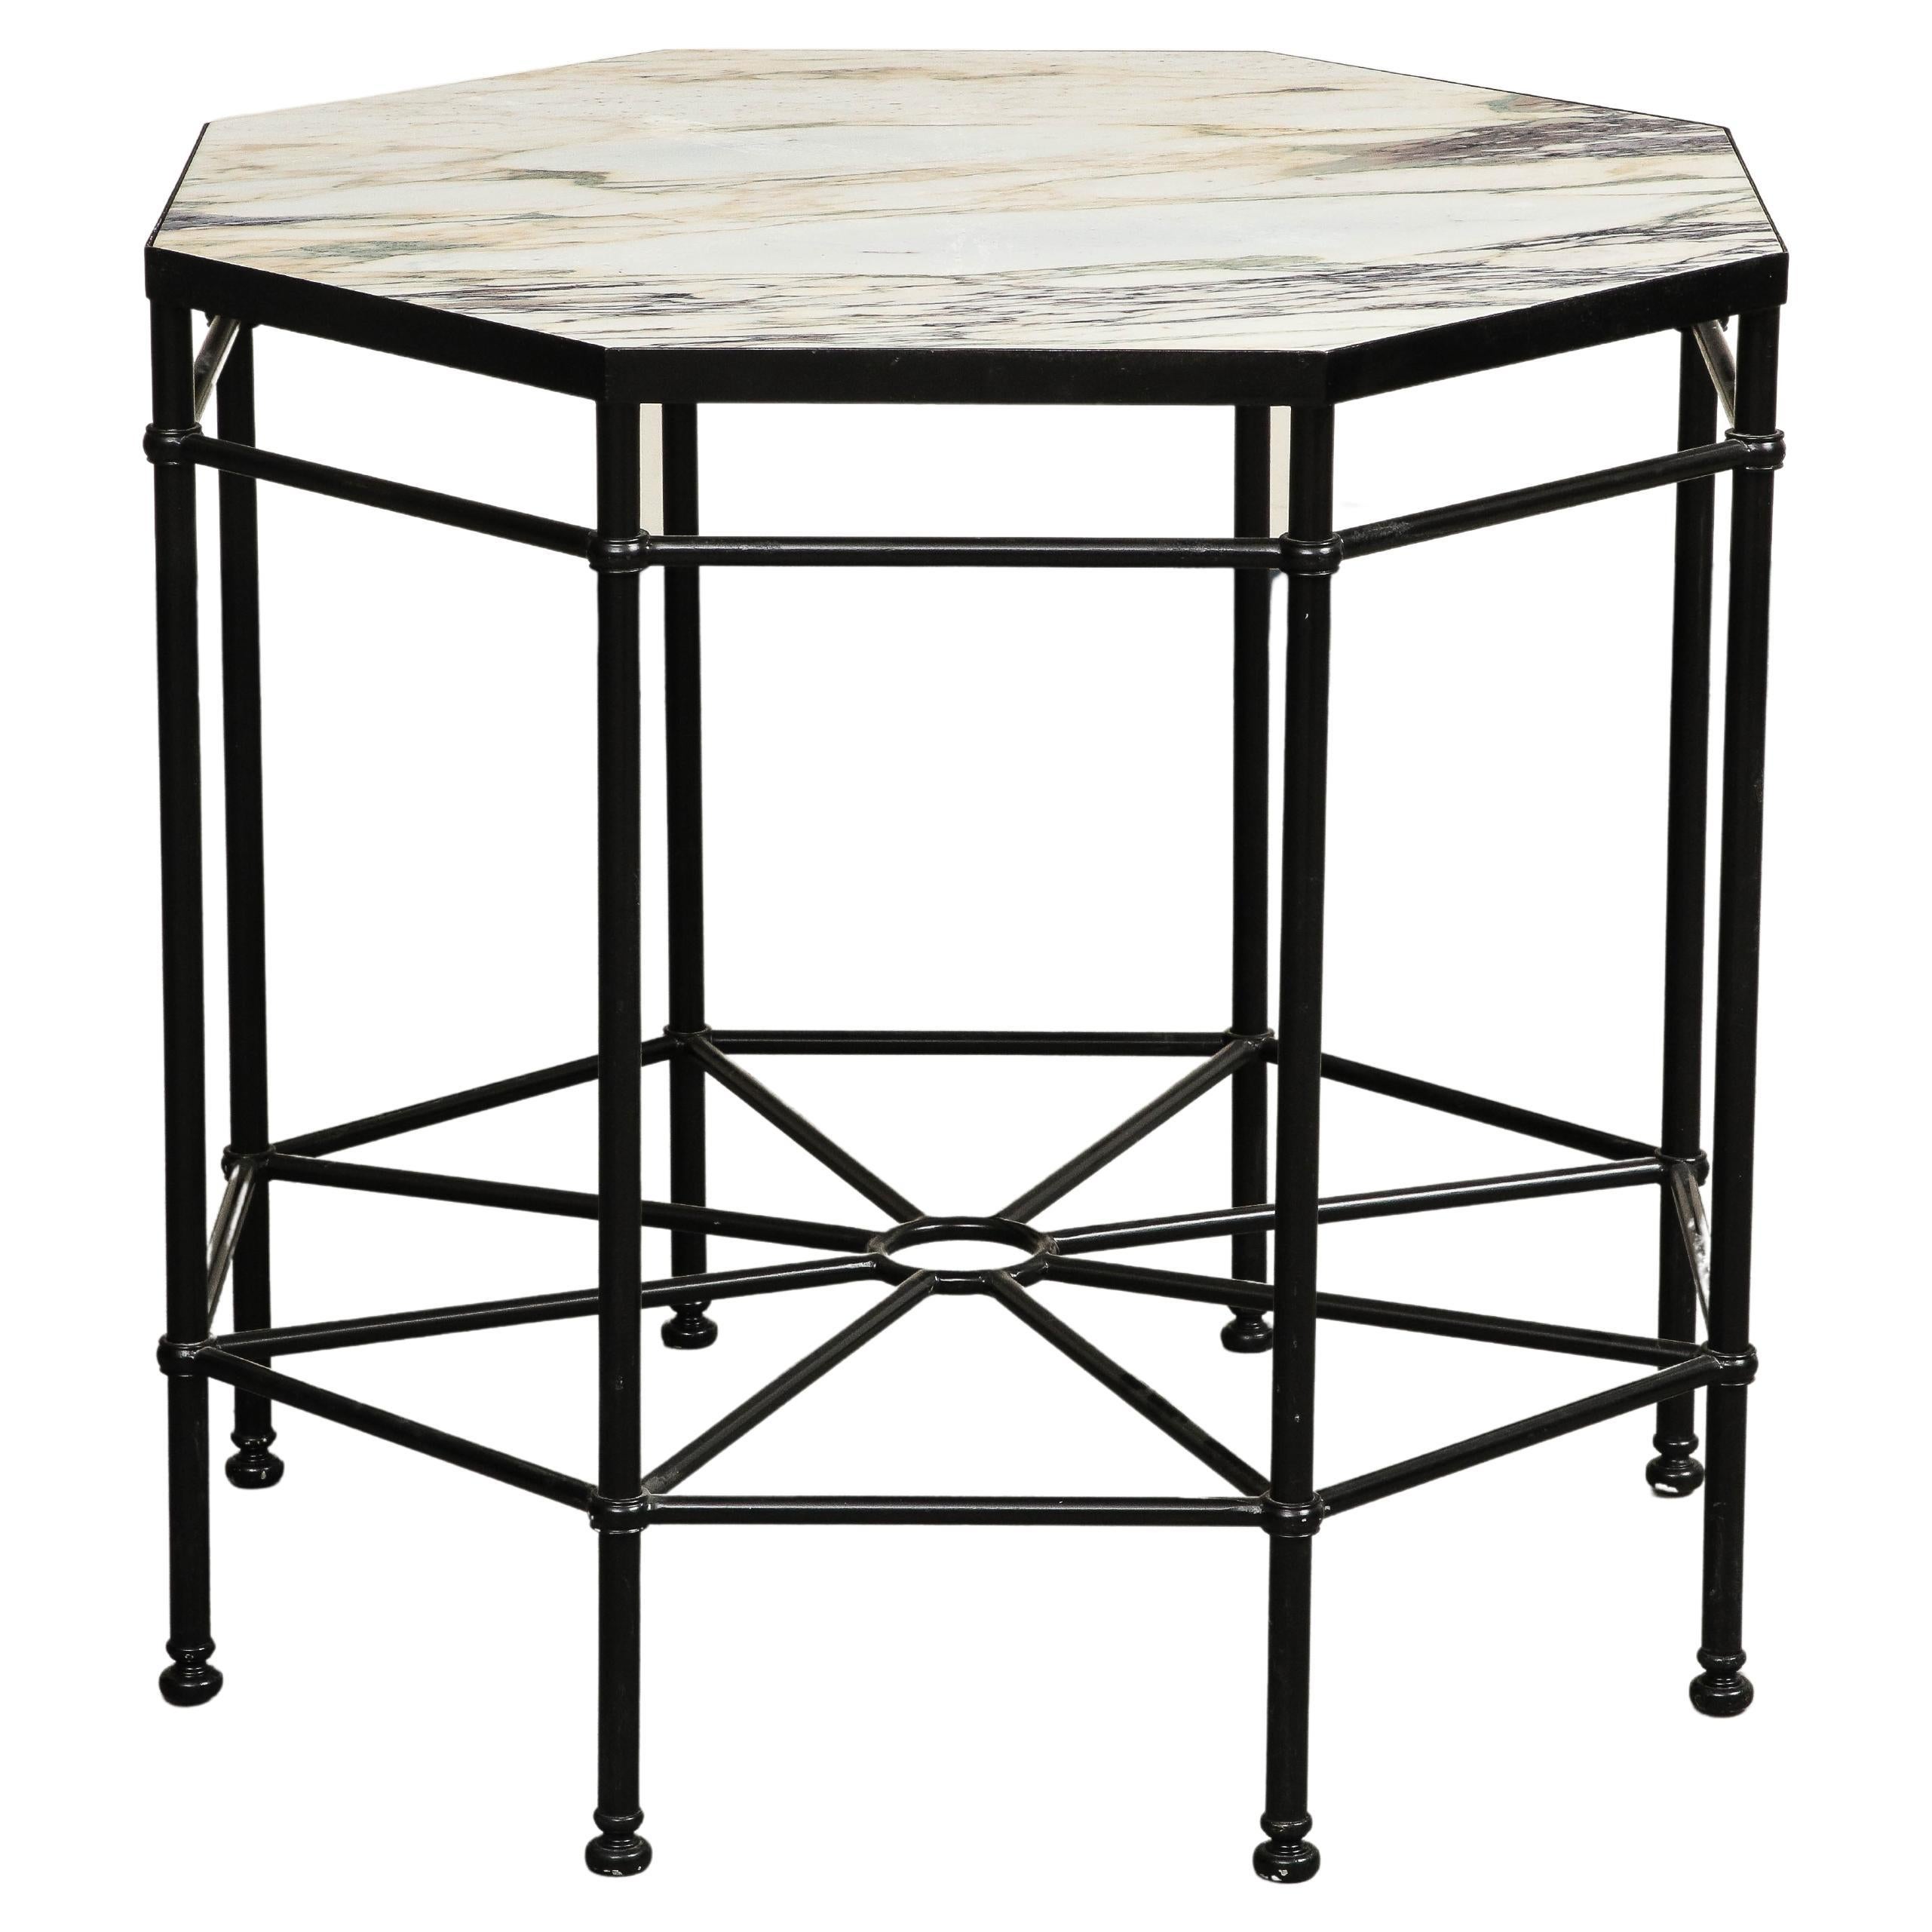 20th Century Octagonal Black Painted Steel Table with New Violetta Marble Top